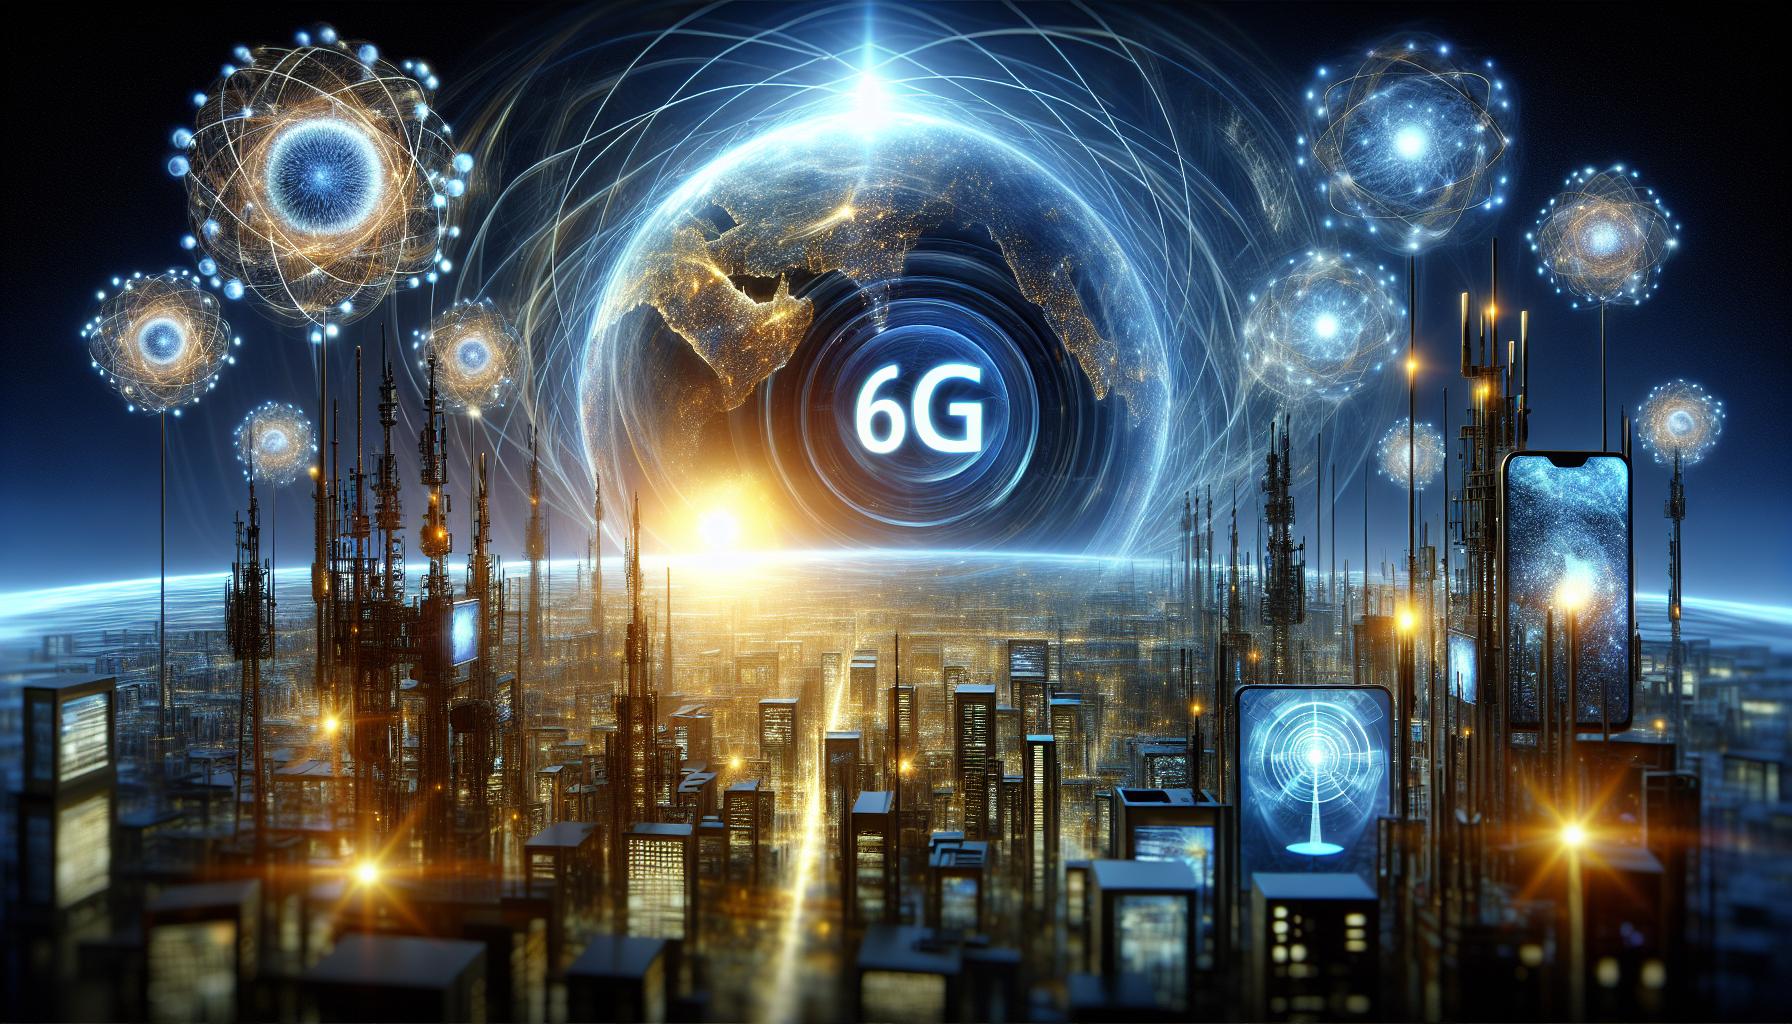 "6G Technology: Global Telecommunications Industry Prepares for 2030 Launch" | FinOracle